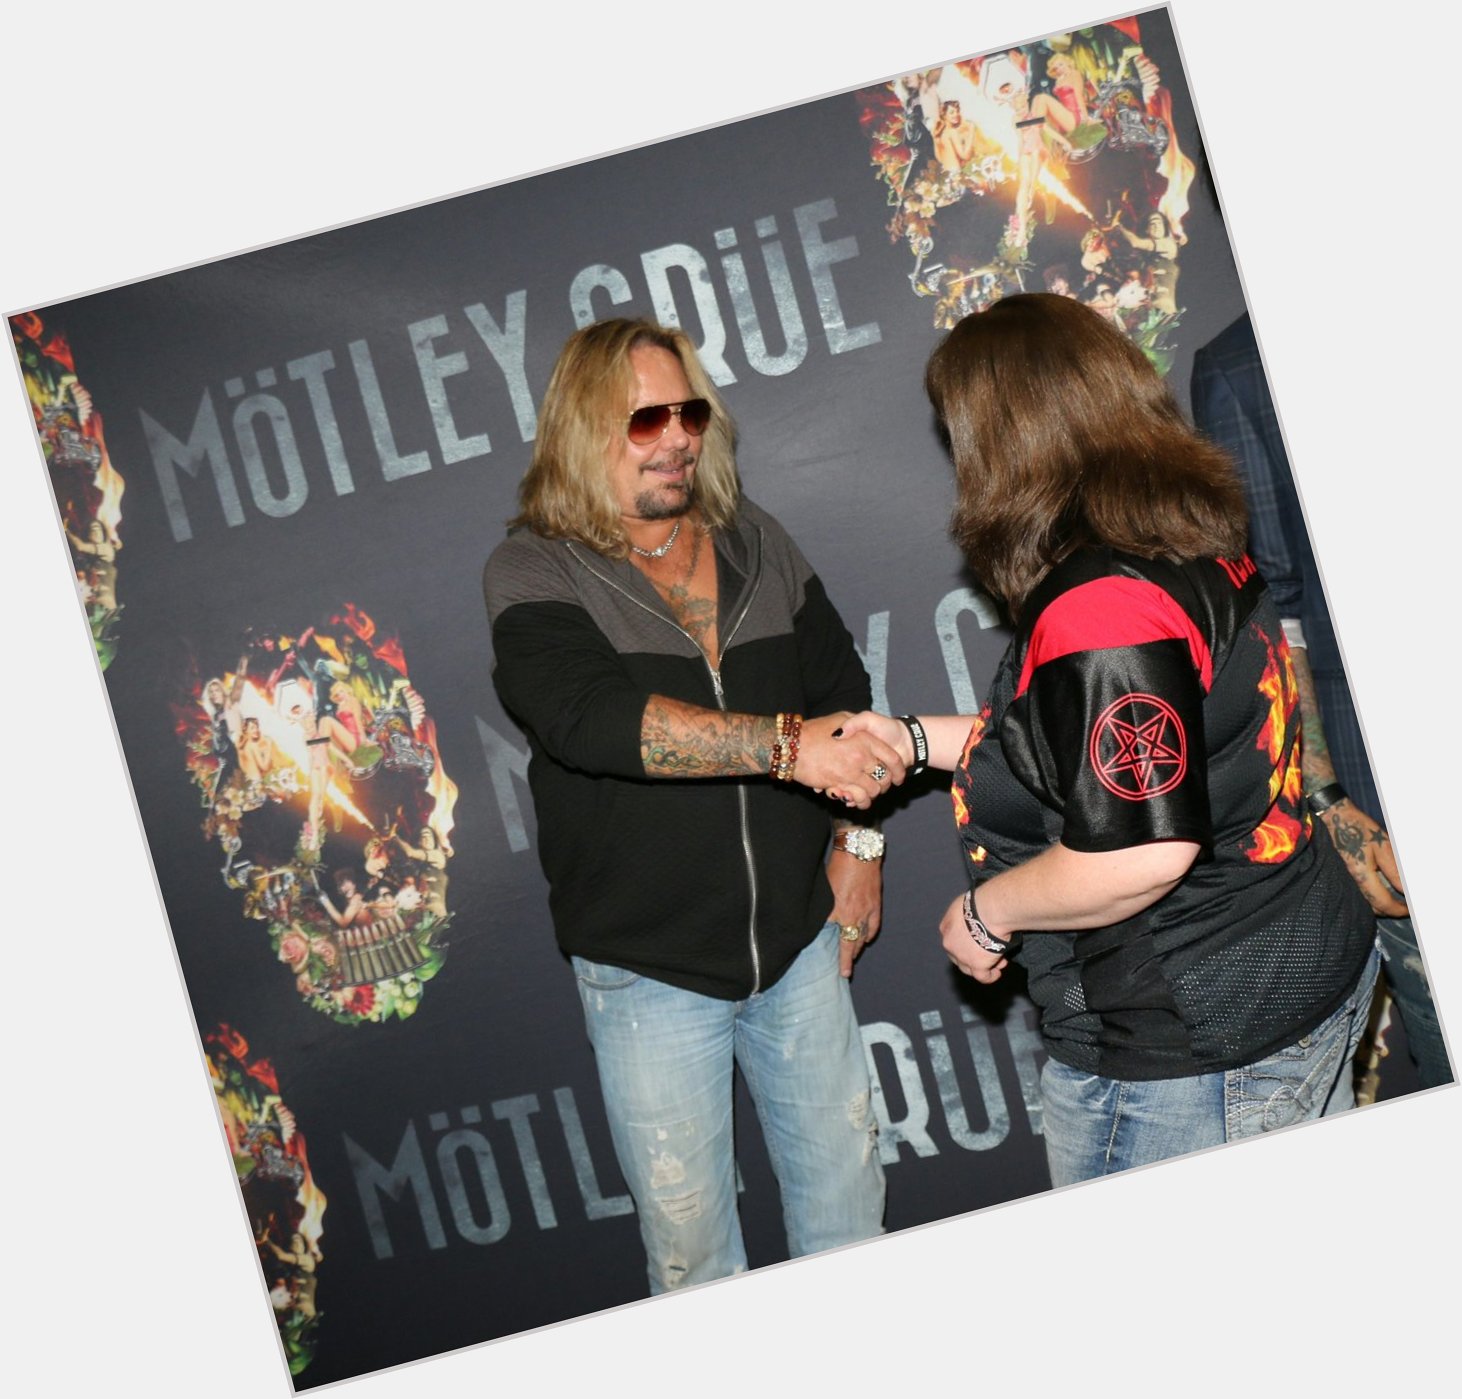 Happy Birthday Vince Neil   August 15, 2015 is a day I\ll never forget finally meeting you. 